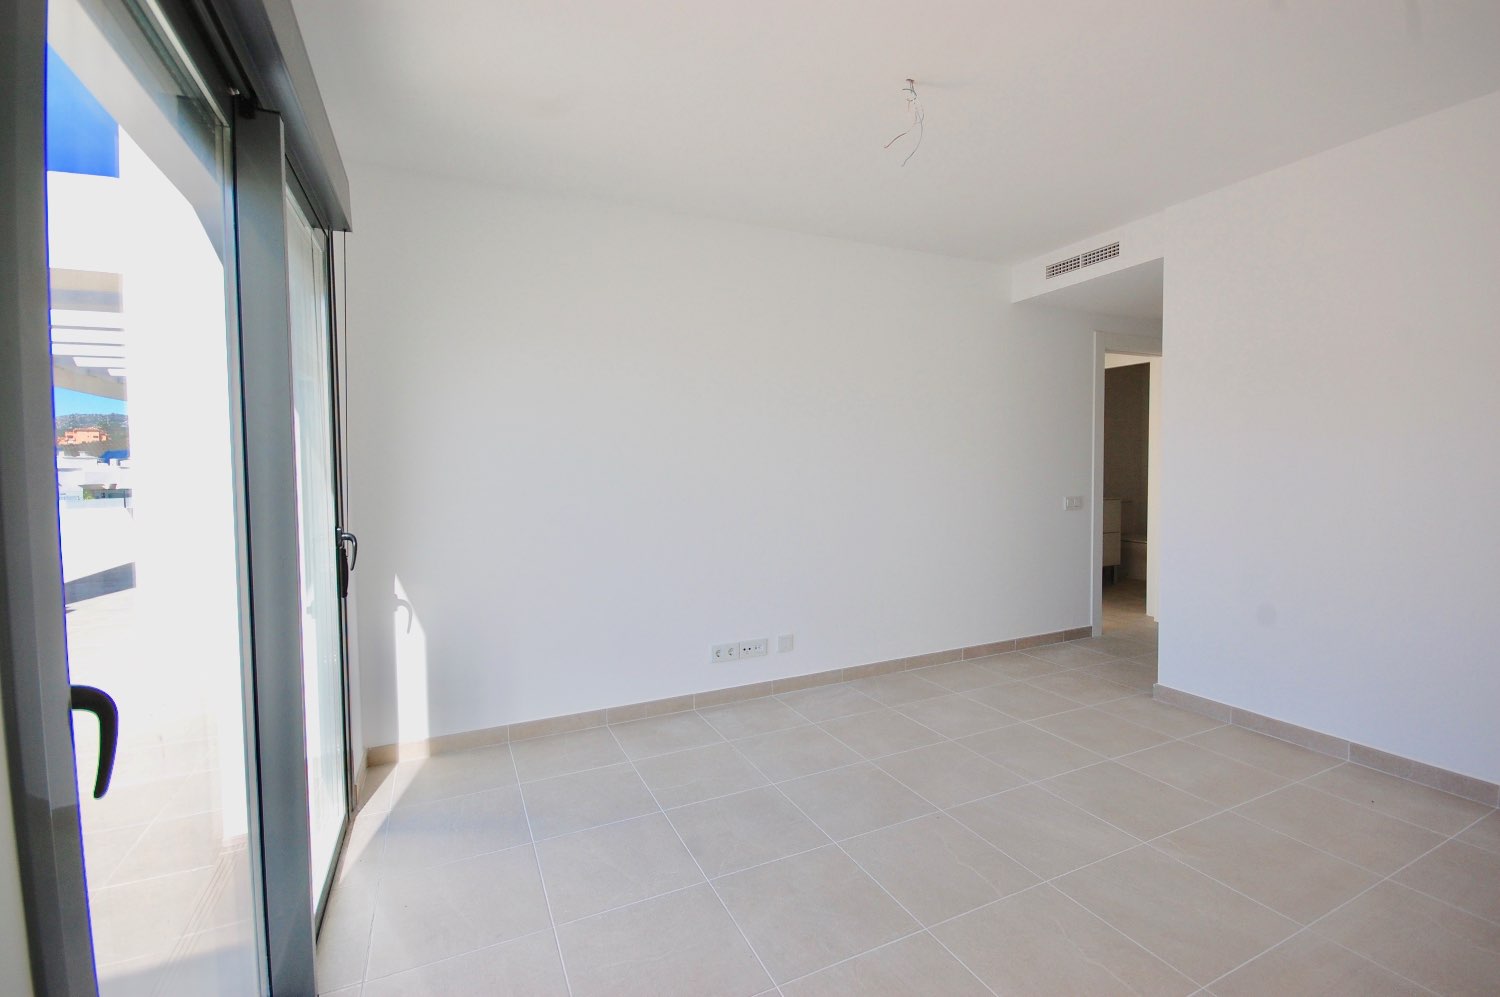 New penthouse for sale in Casares Golf - Casares - Costa del Sol